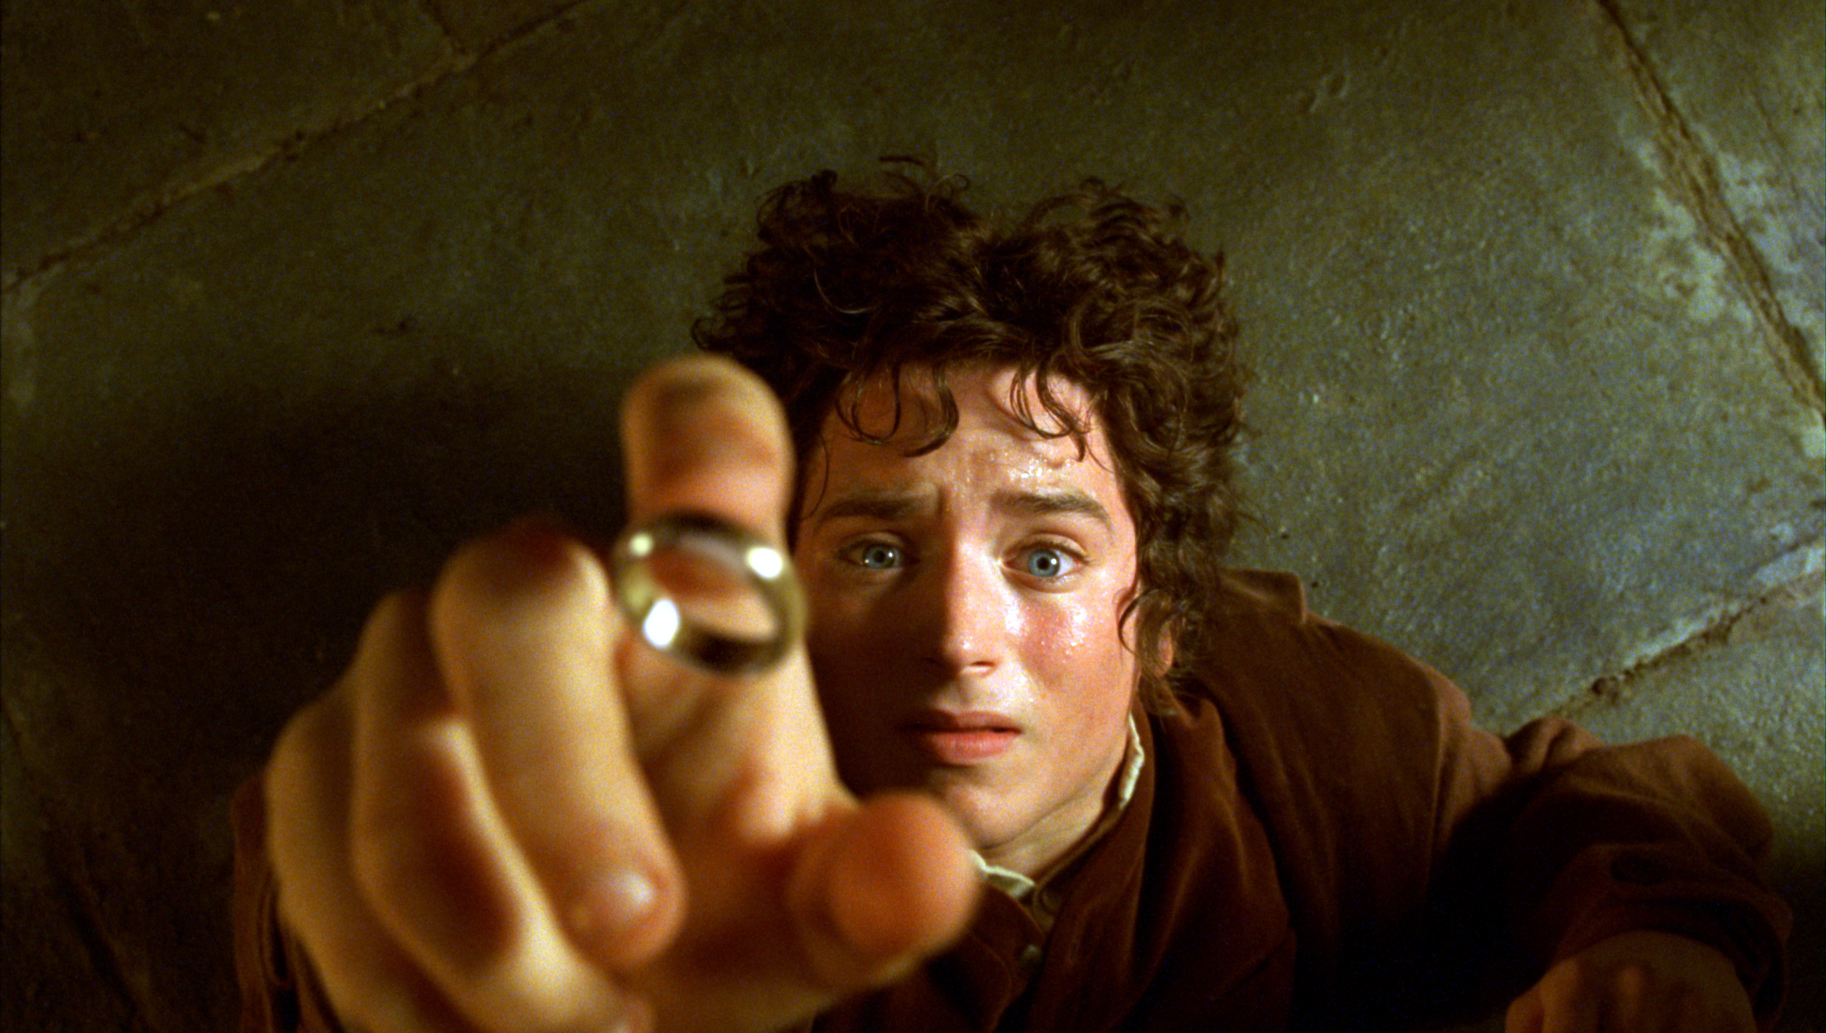 frodo-the-lord-of-the-rings-the-fellowship-of-the-ringe9c06a.jpg